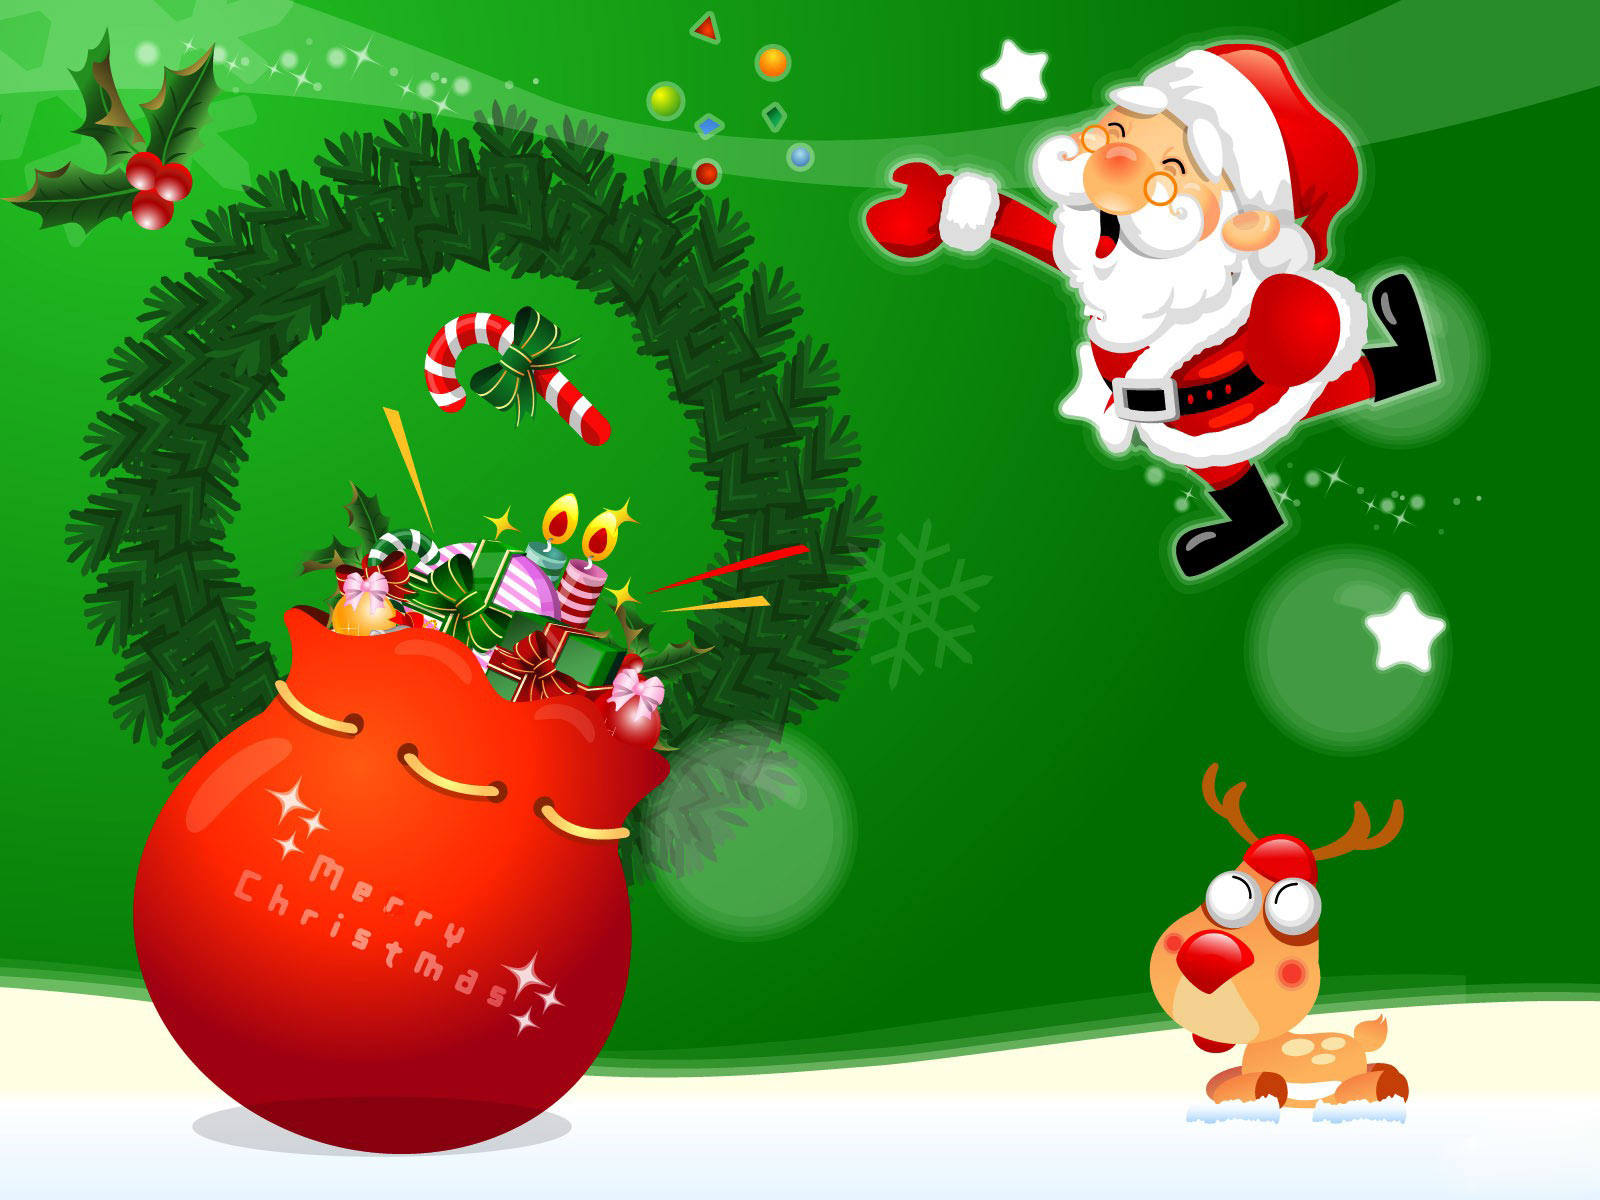 Holiday Puter Wallpaper On